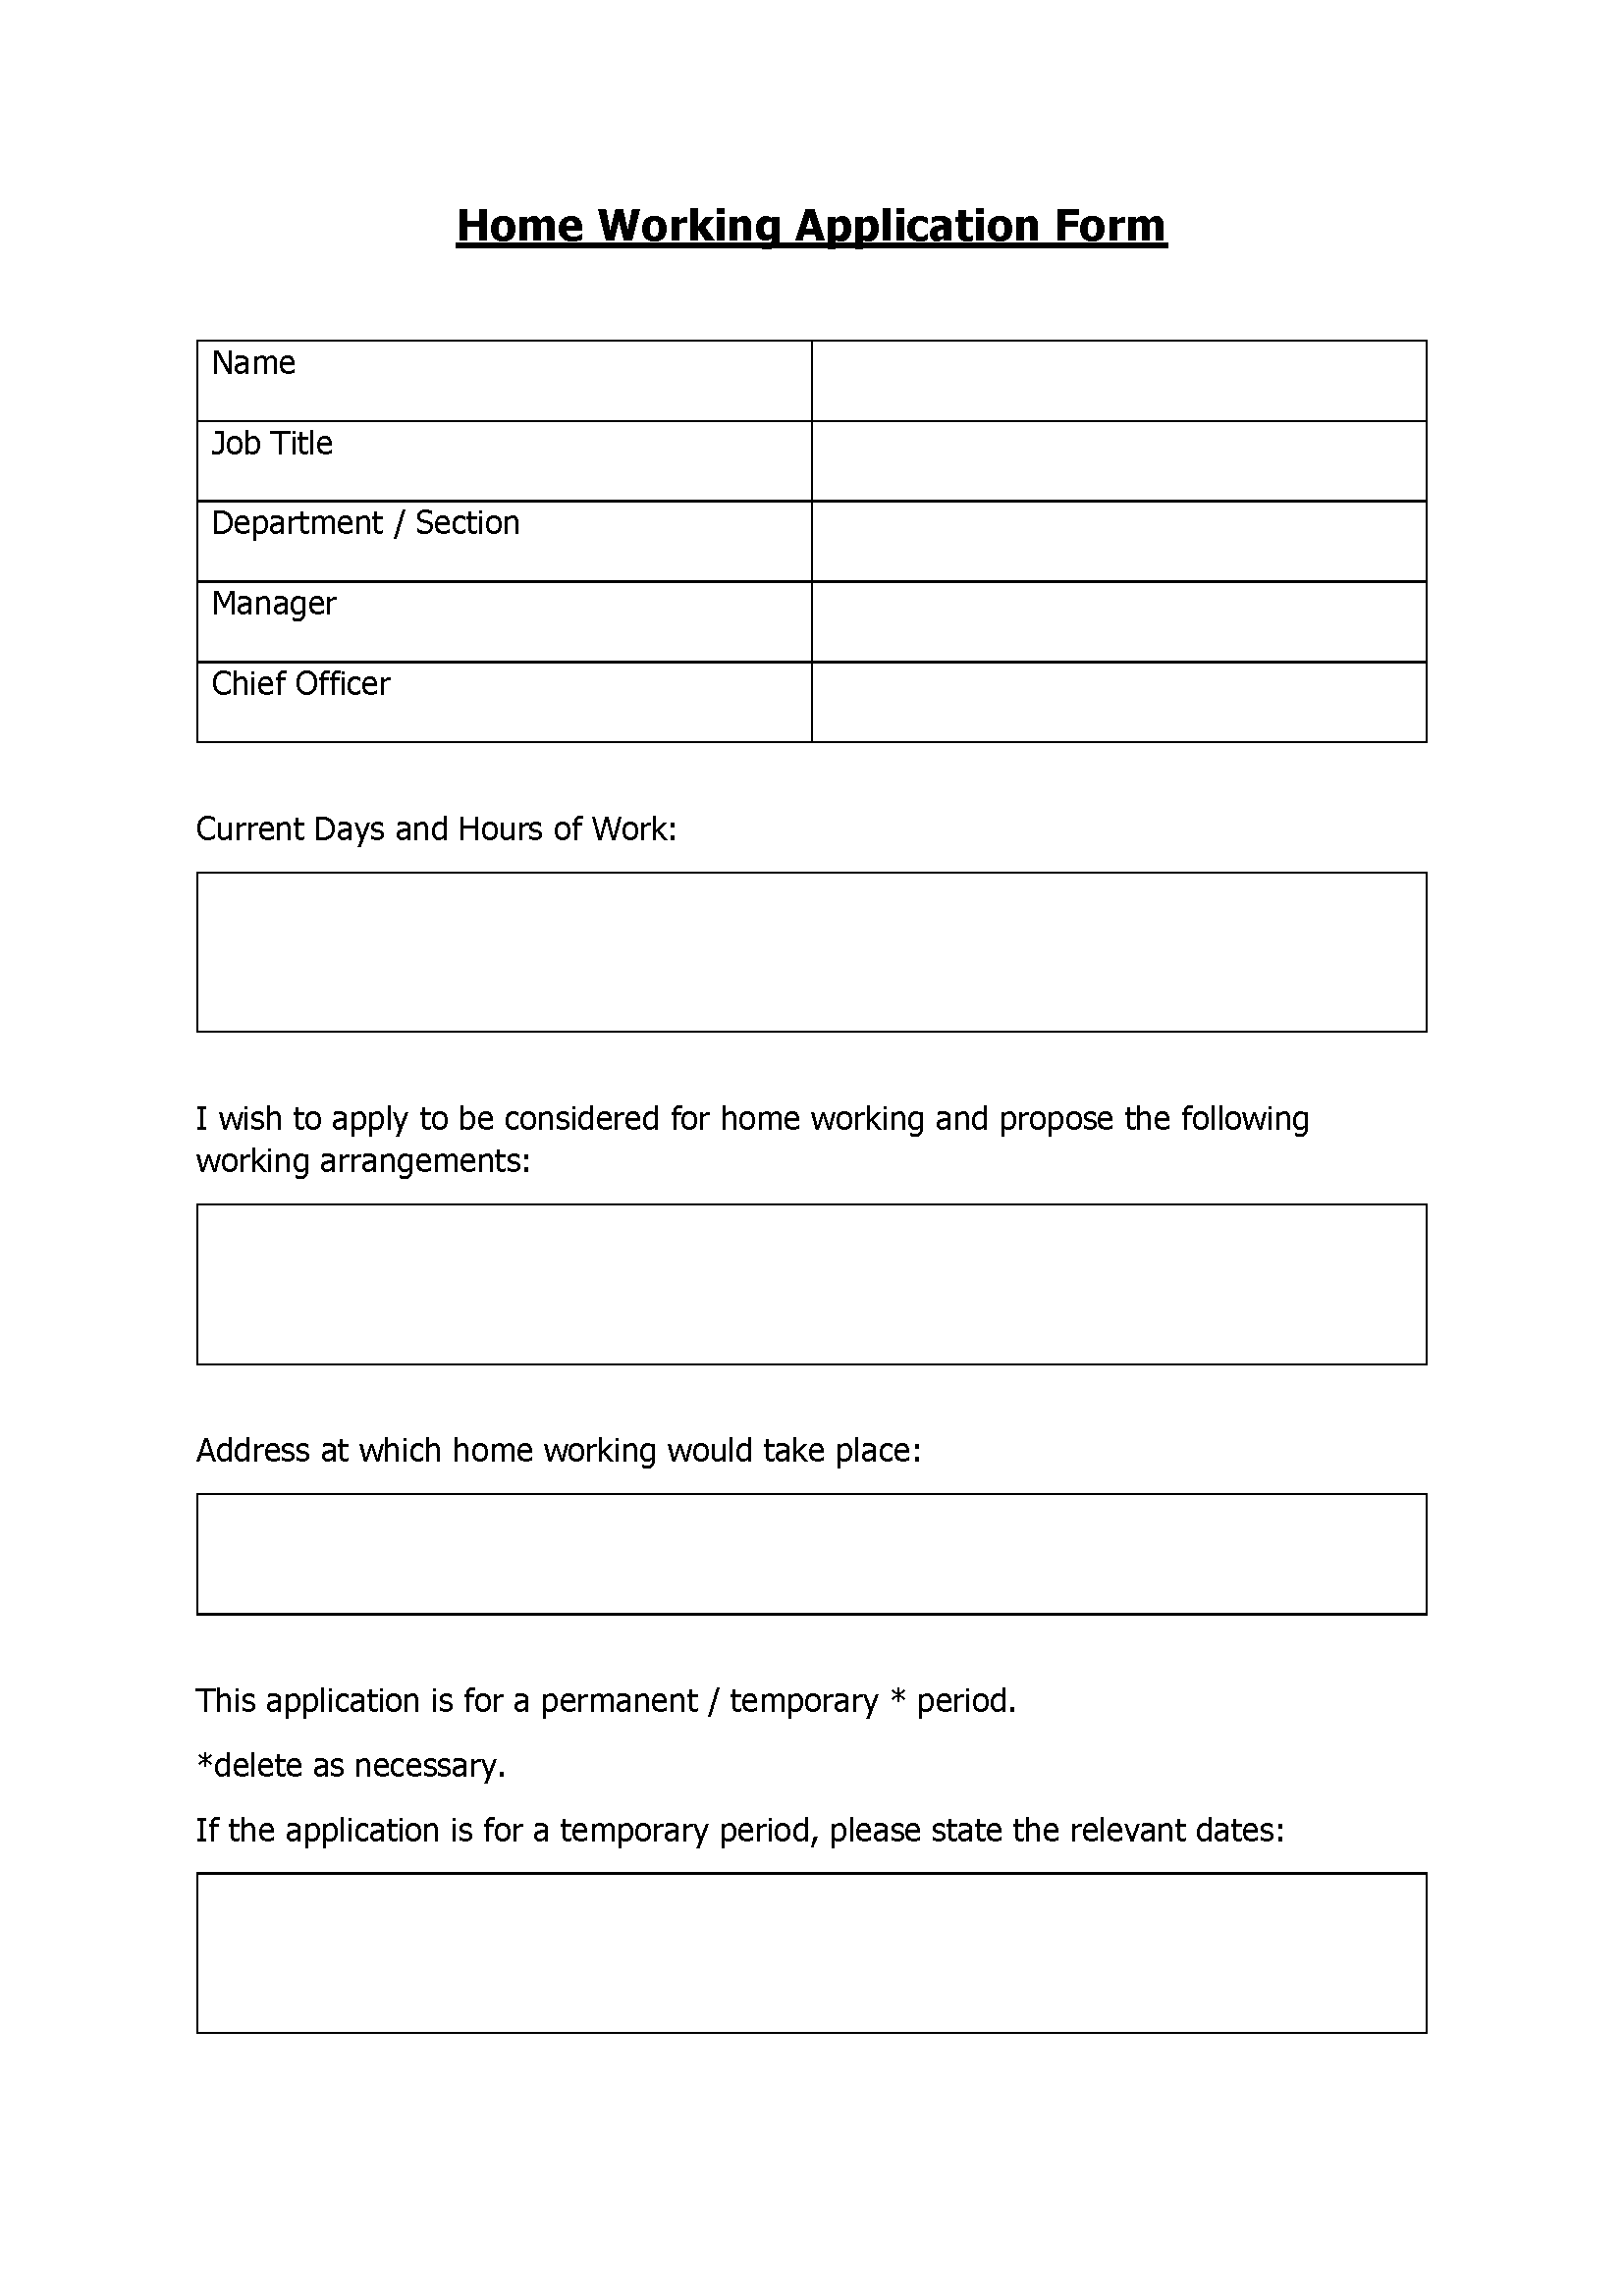 Home Working Application Form